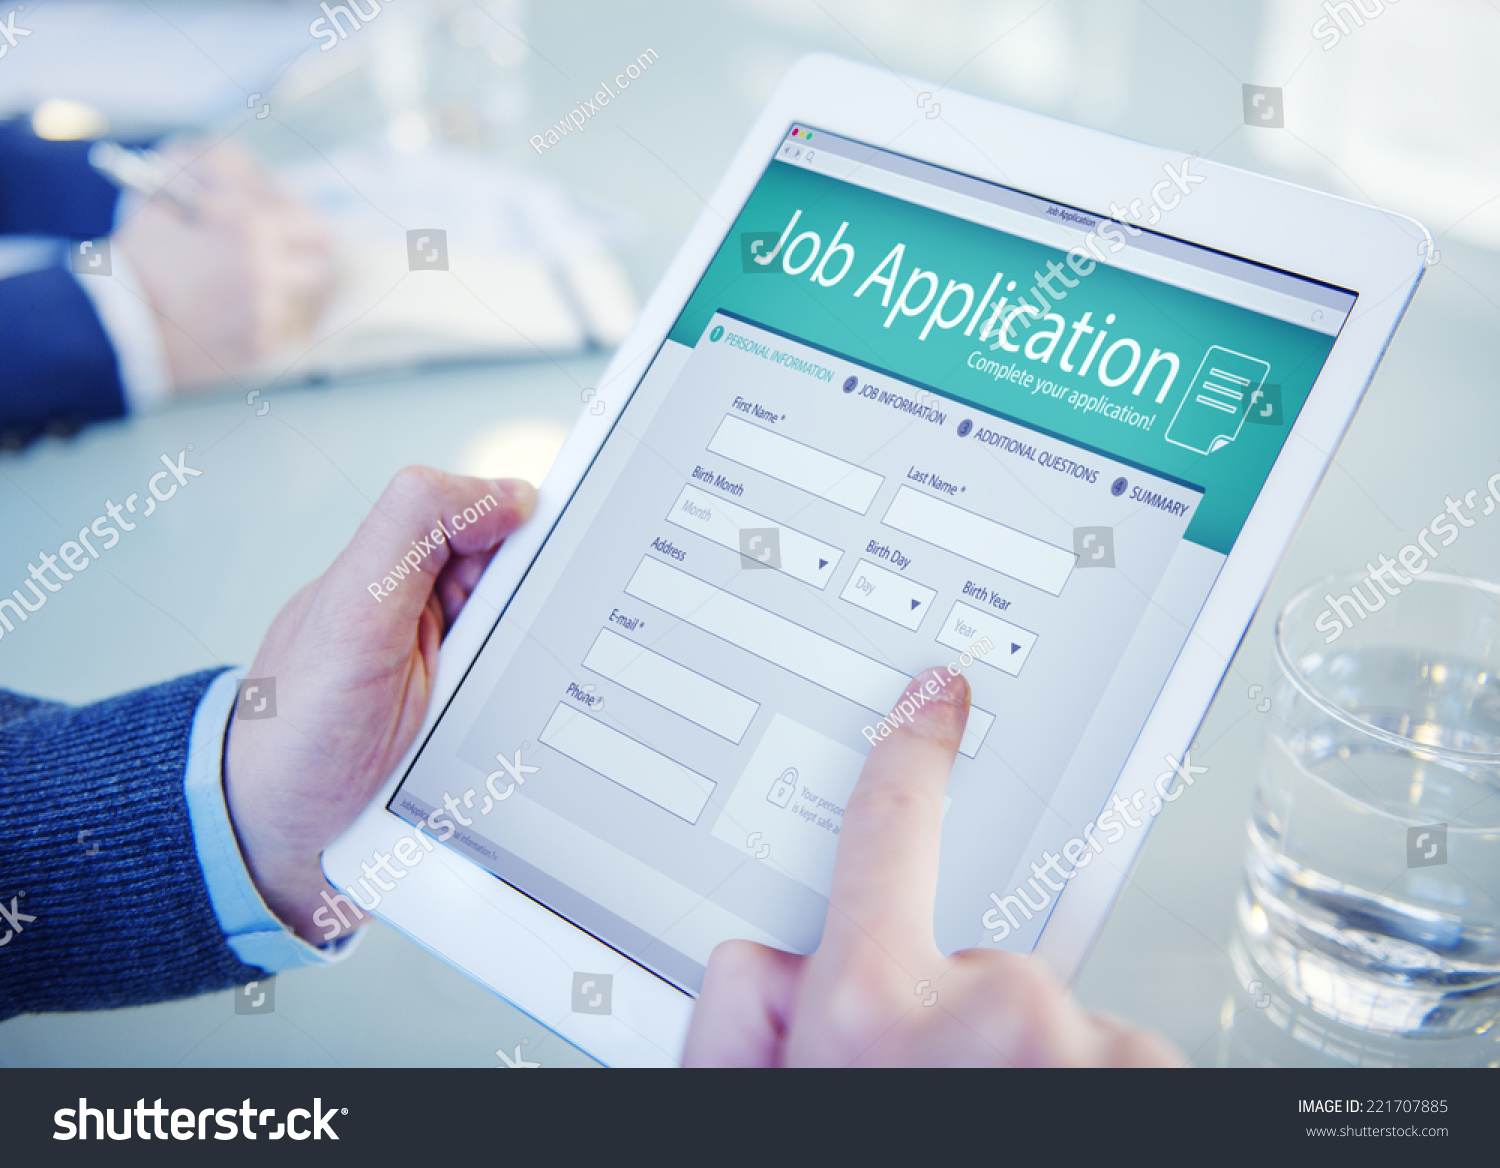 Applicant Filling Up the Online Job Application #221707885